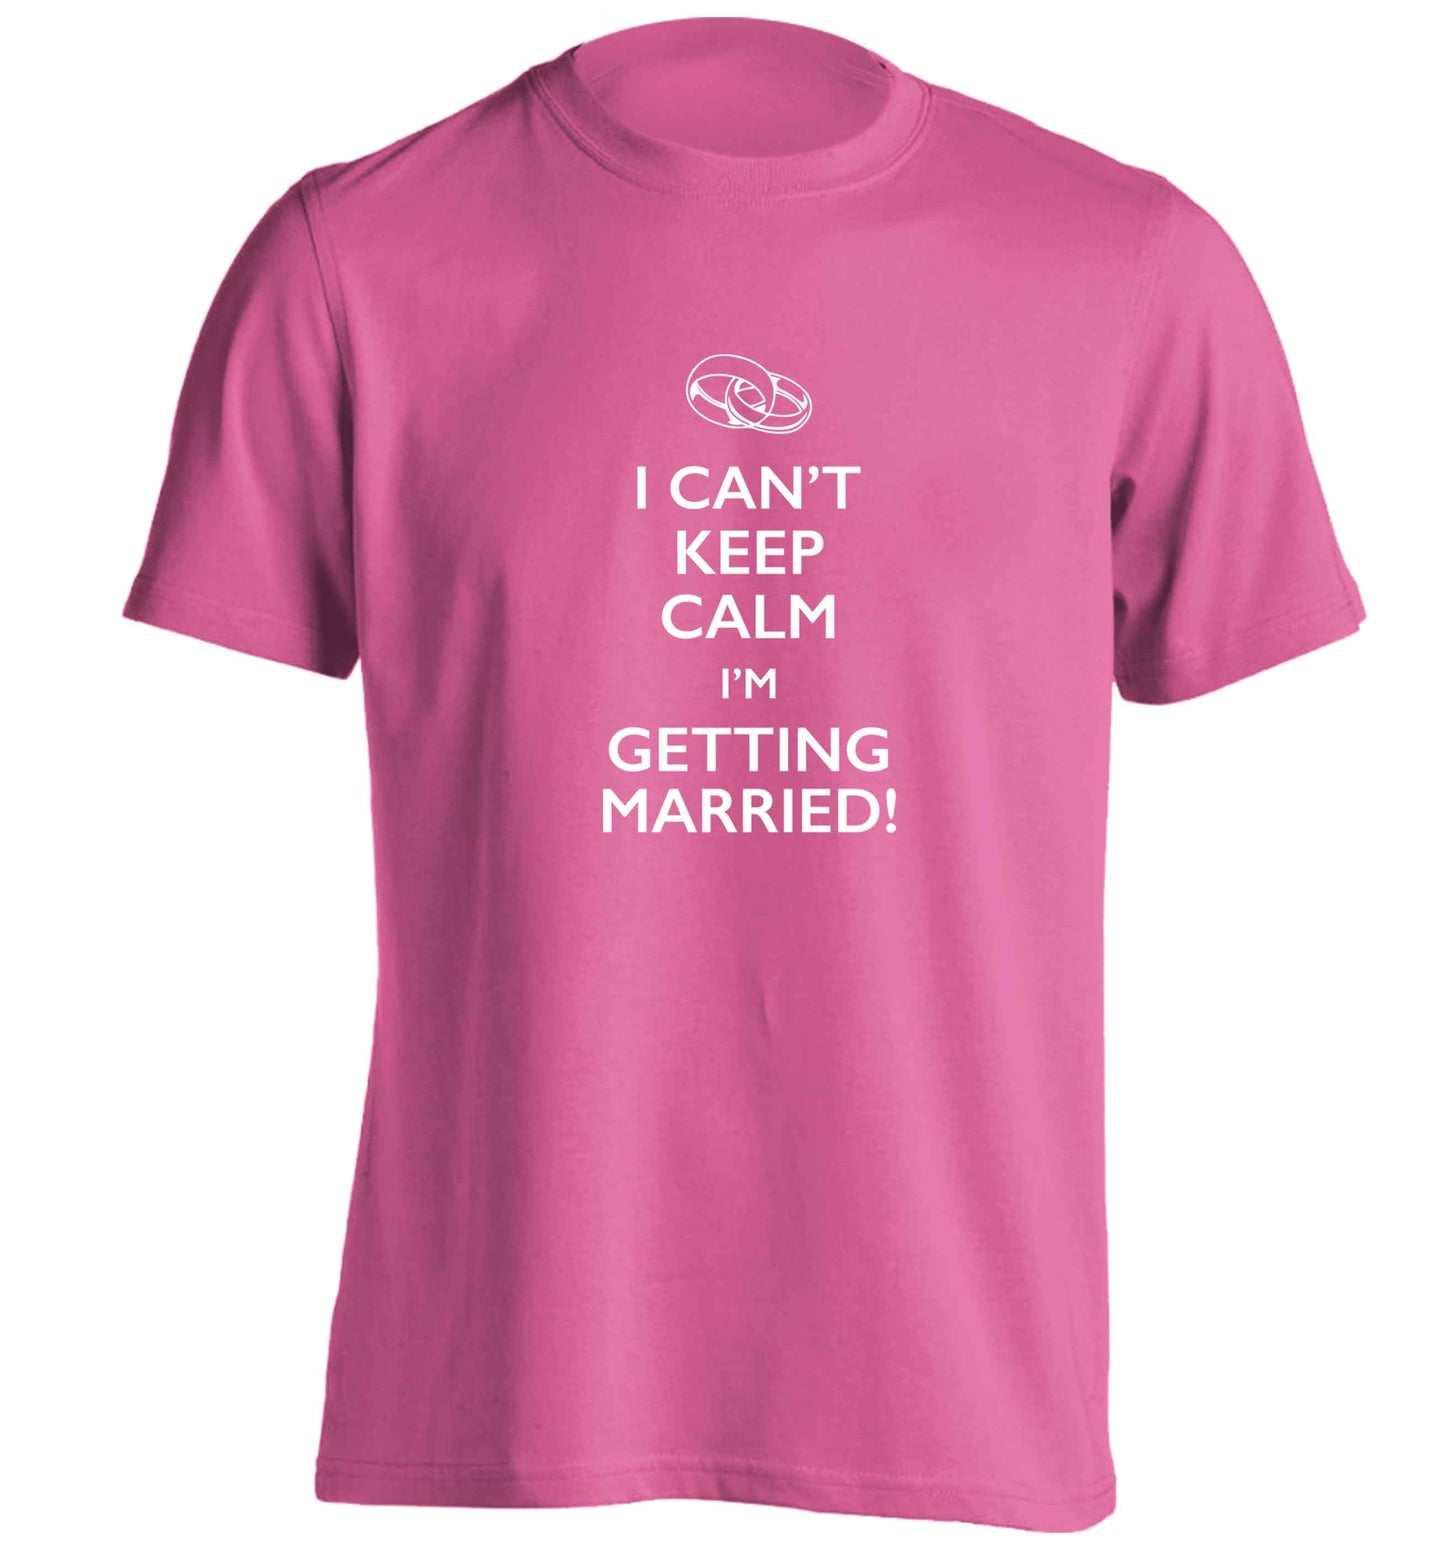 I can't keep calm I'm getting married! adults unisex pink Tshirt 2XL